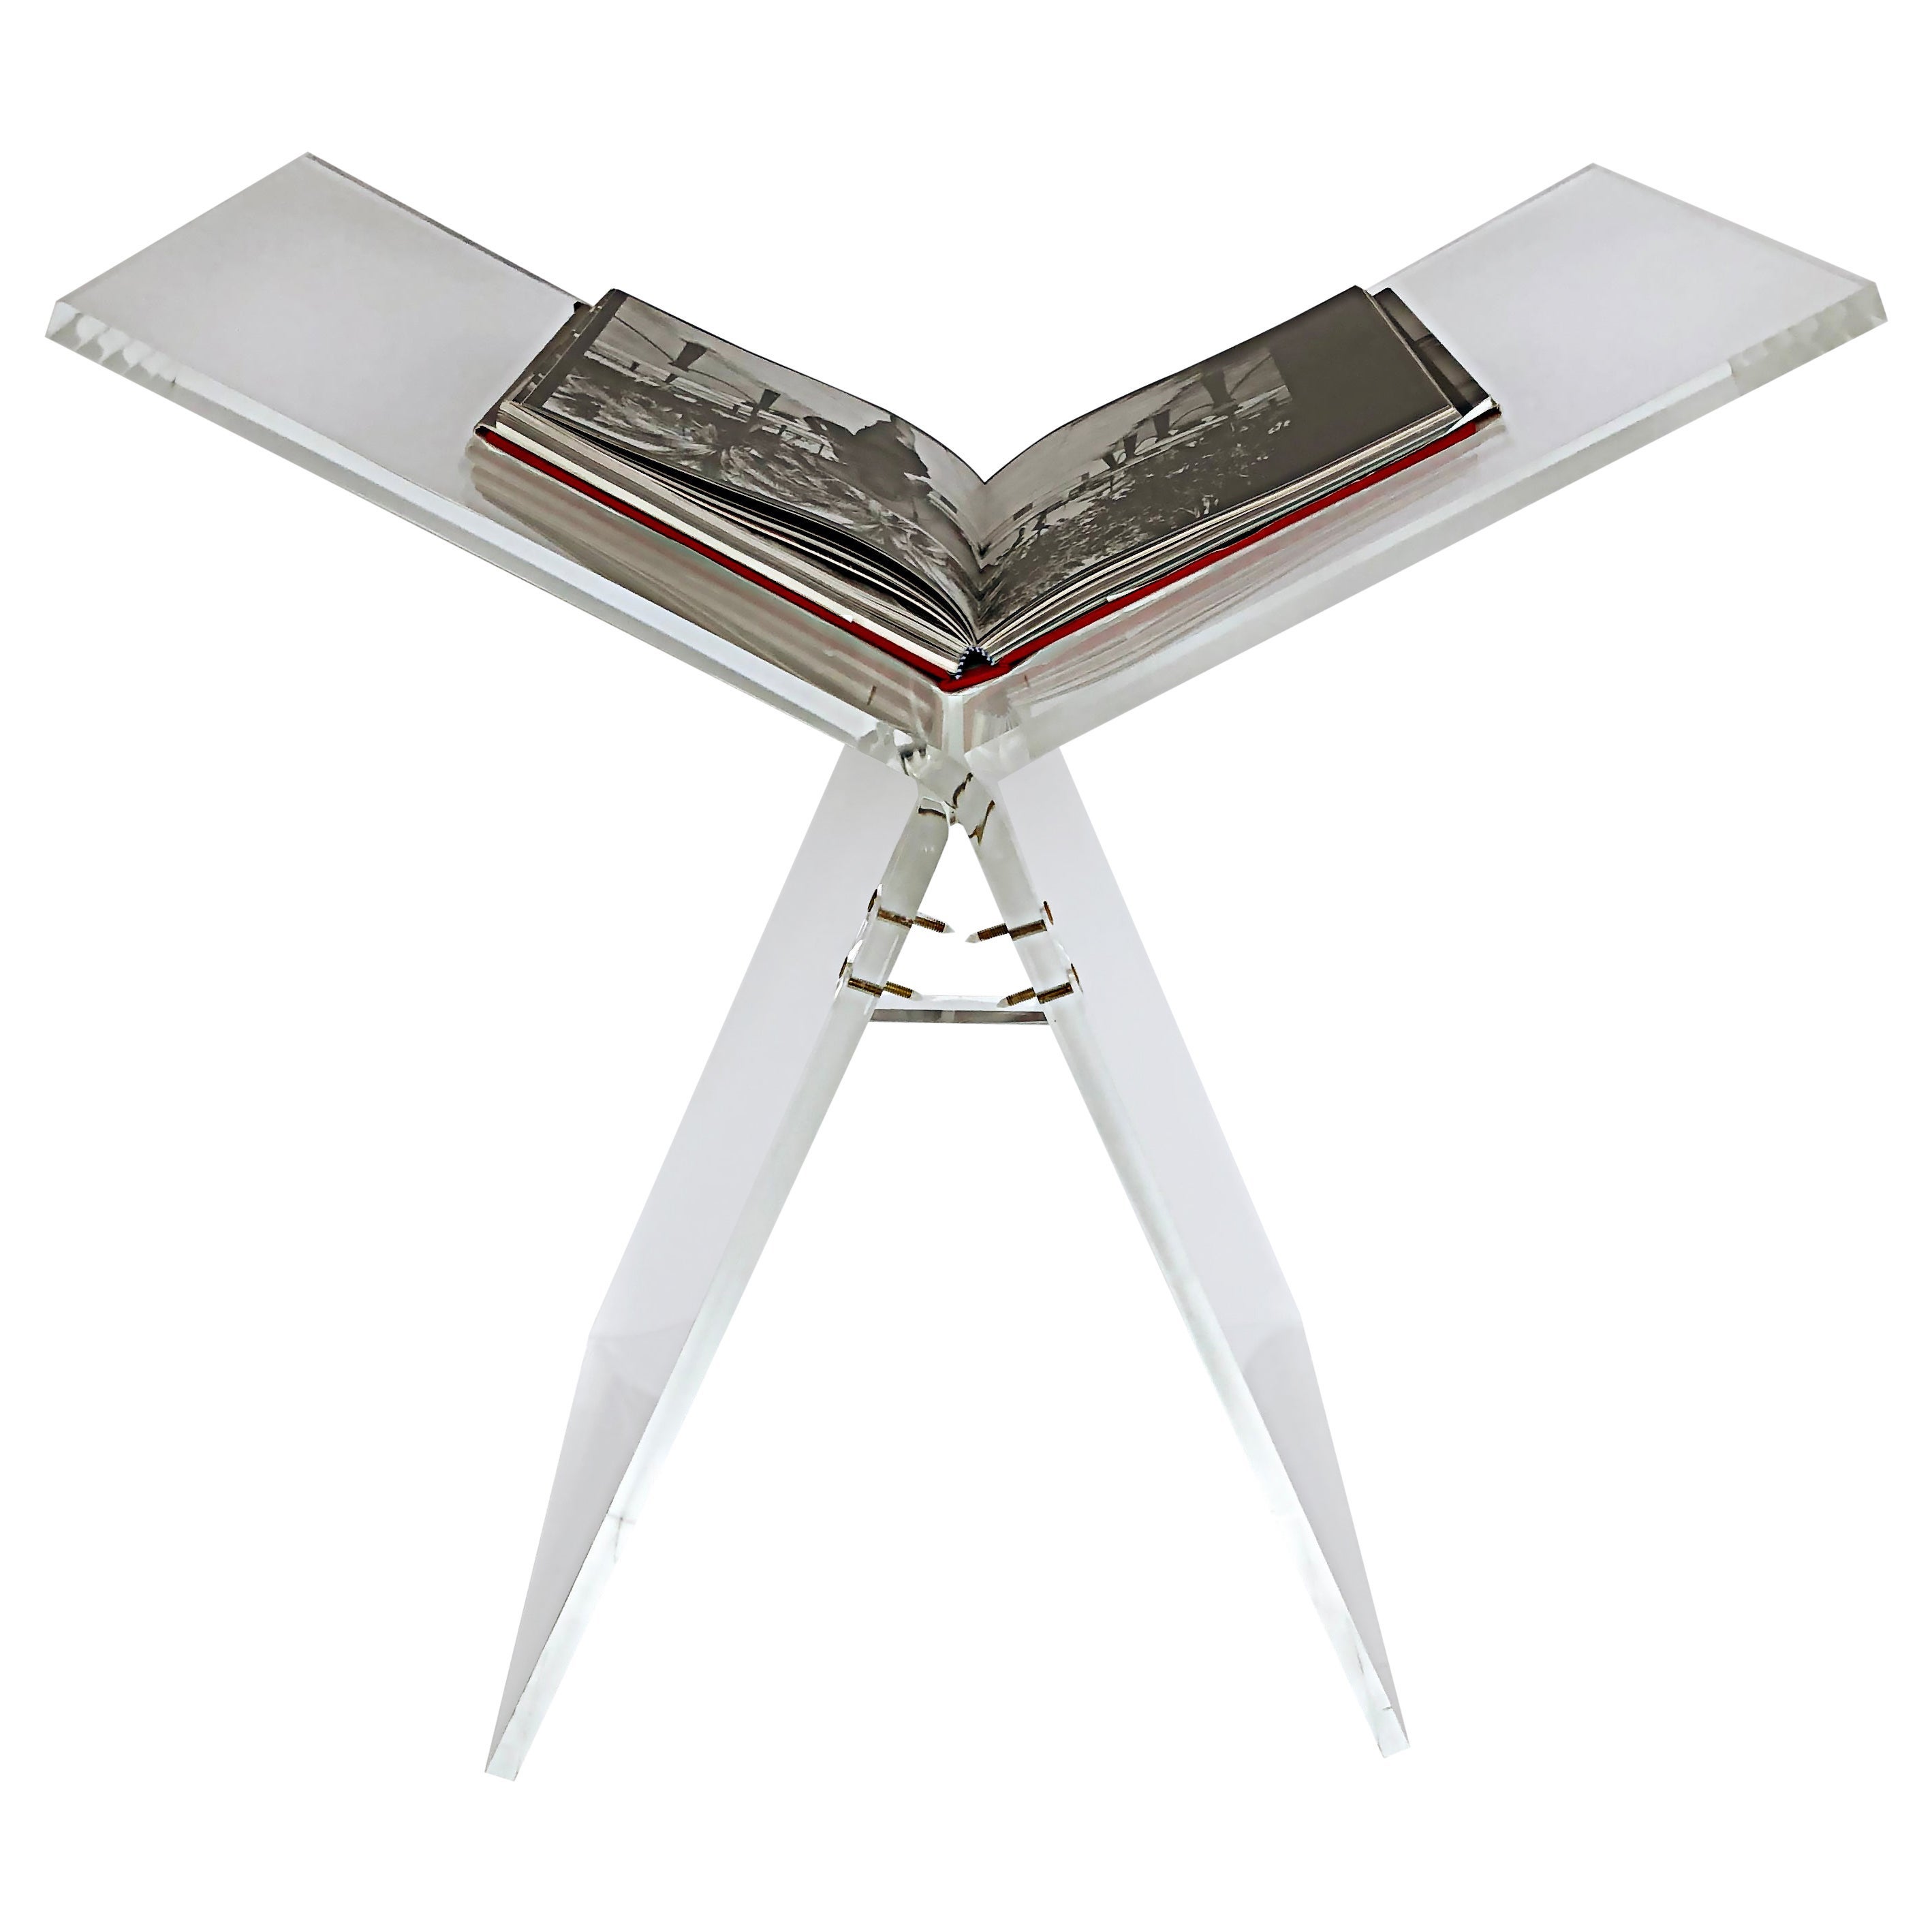 Custom Made Lucite Oversized Coffee Table Book Stand for Taschen Sumos